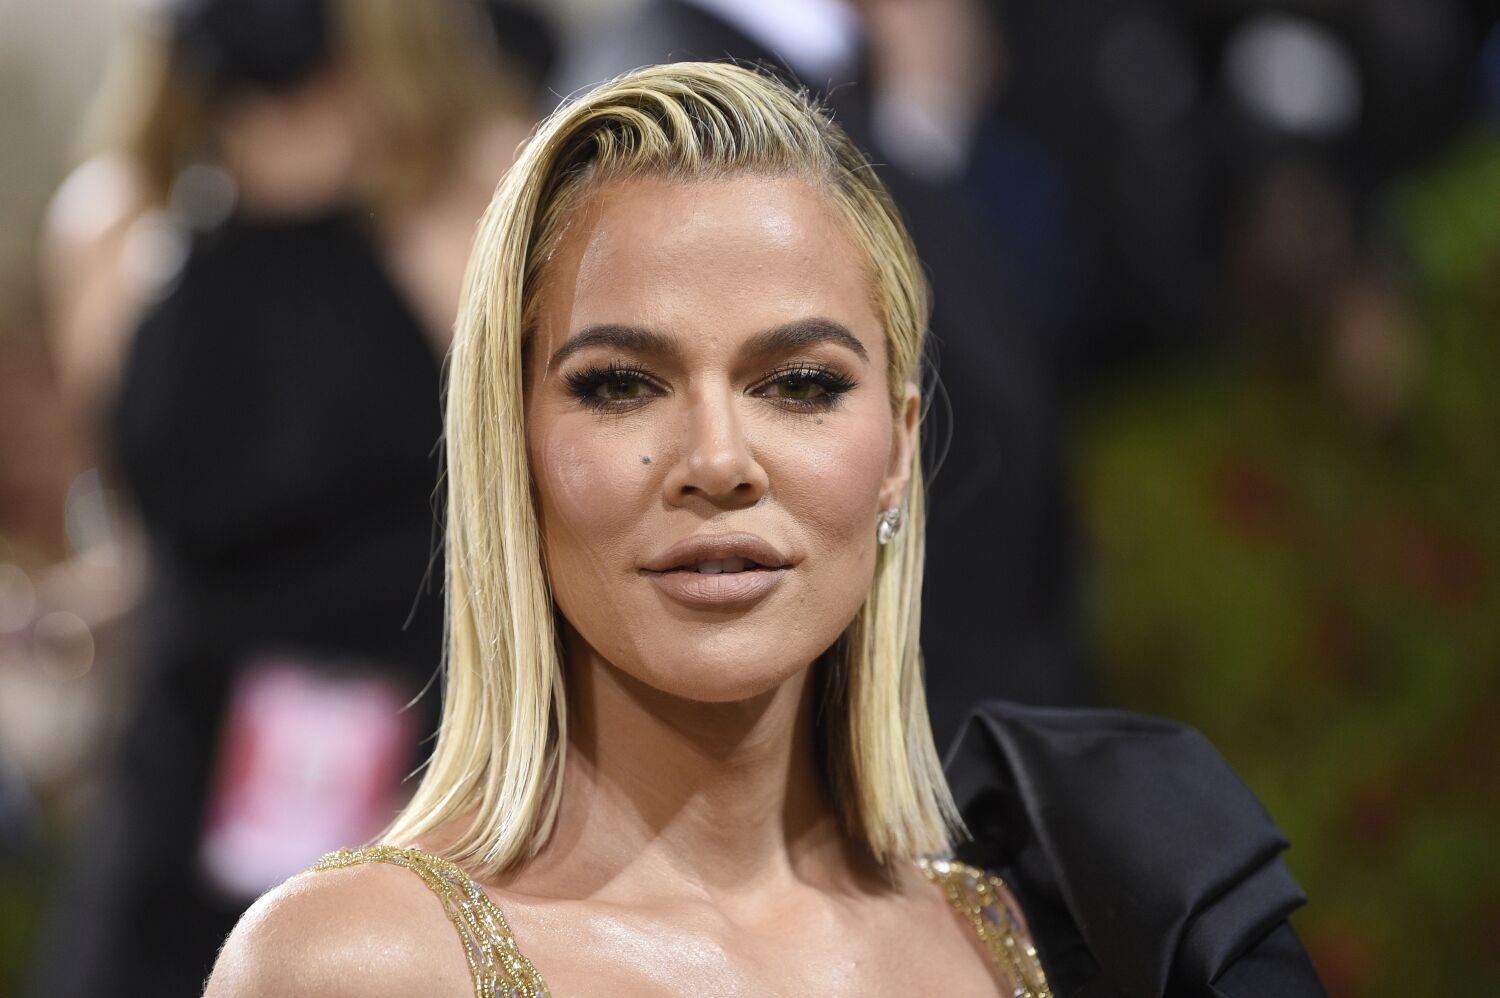 Khloé Kardashian says she rejected a marriage proposal from Tristan Thompson